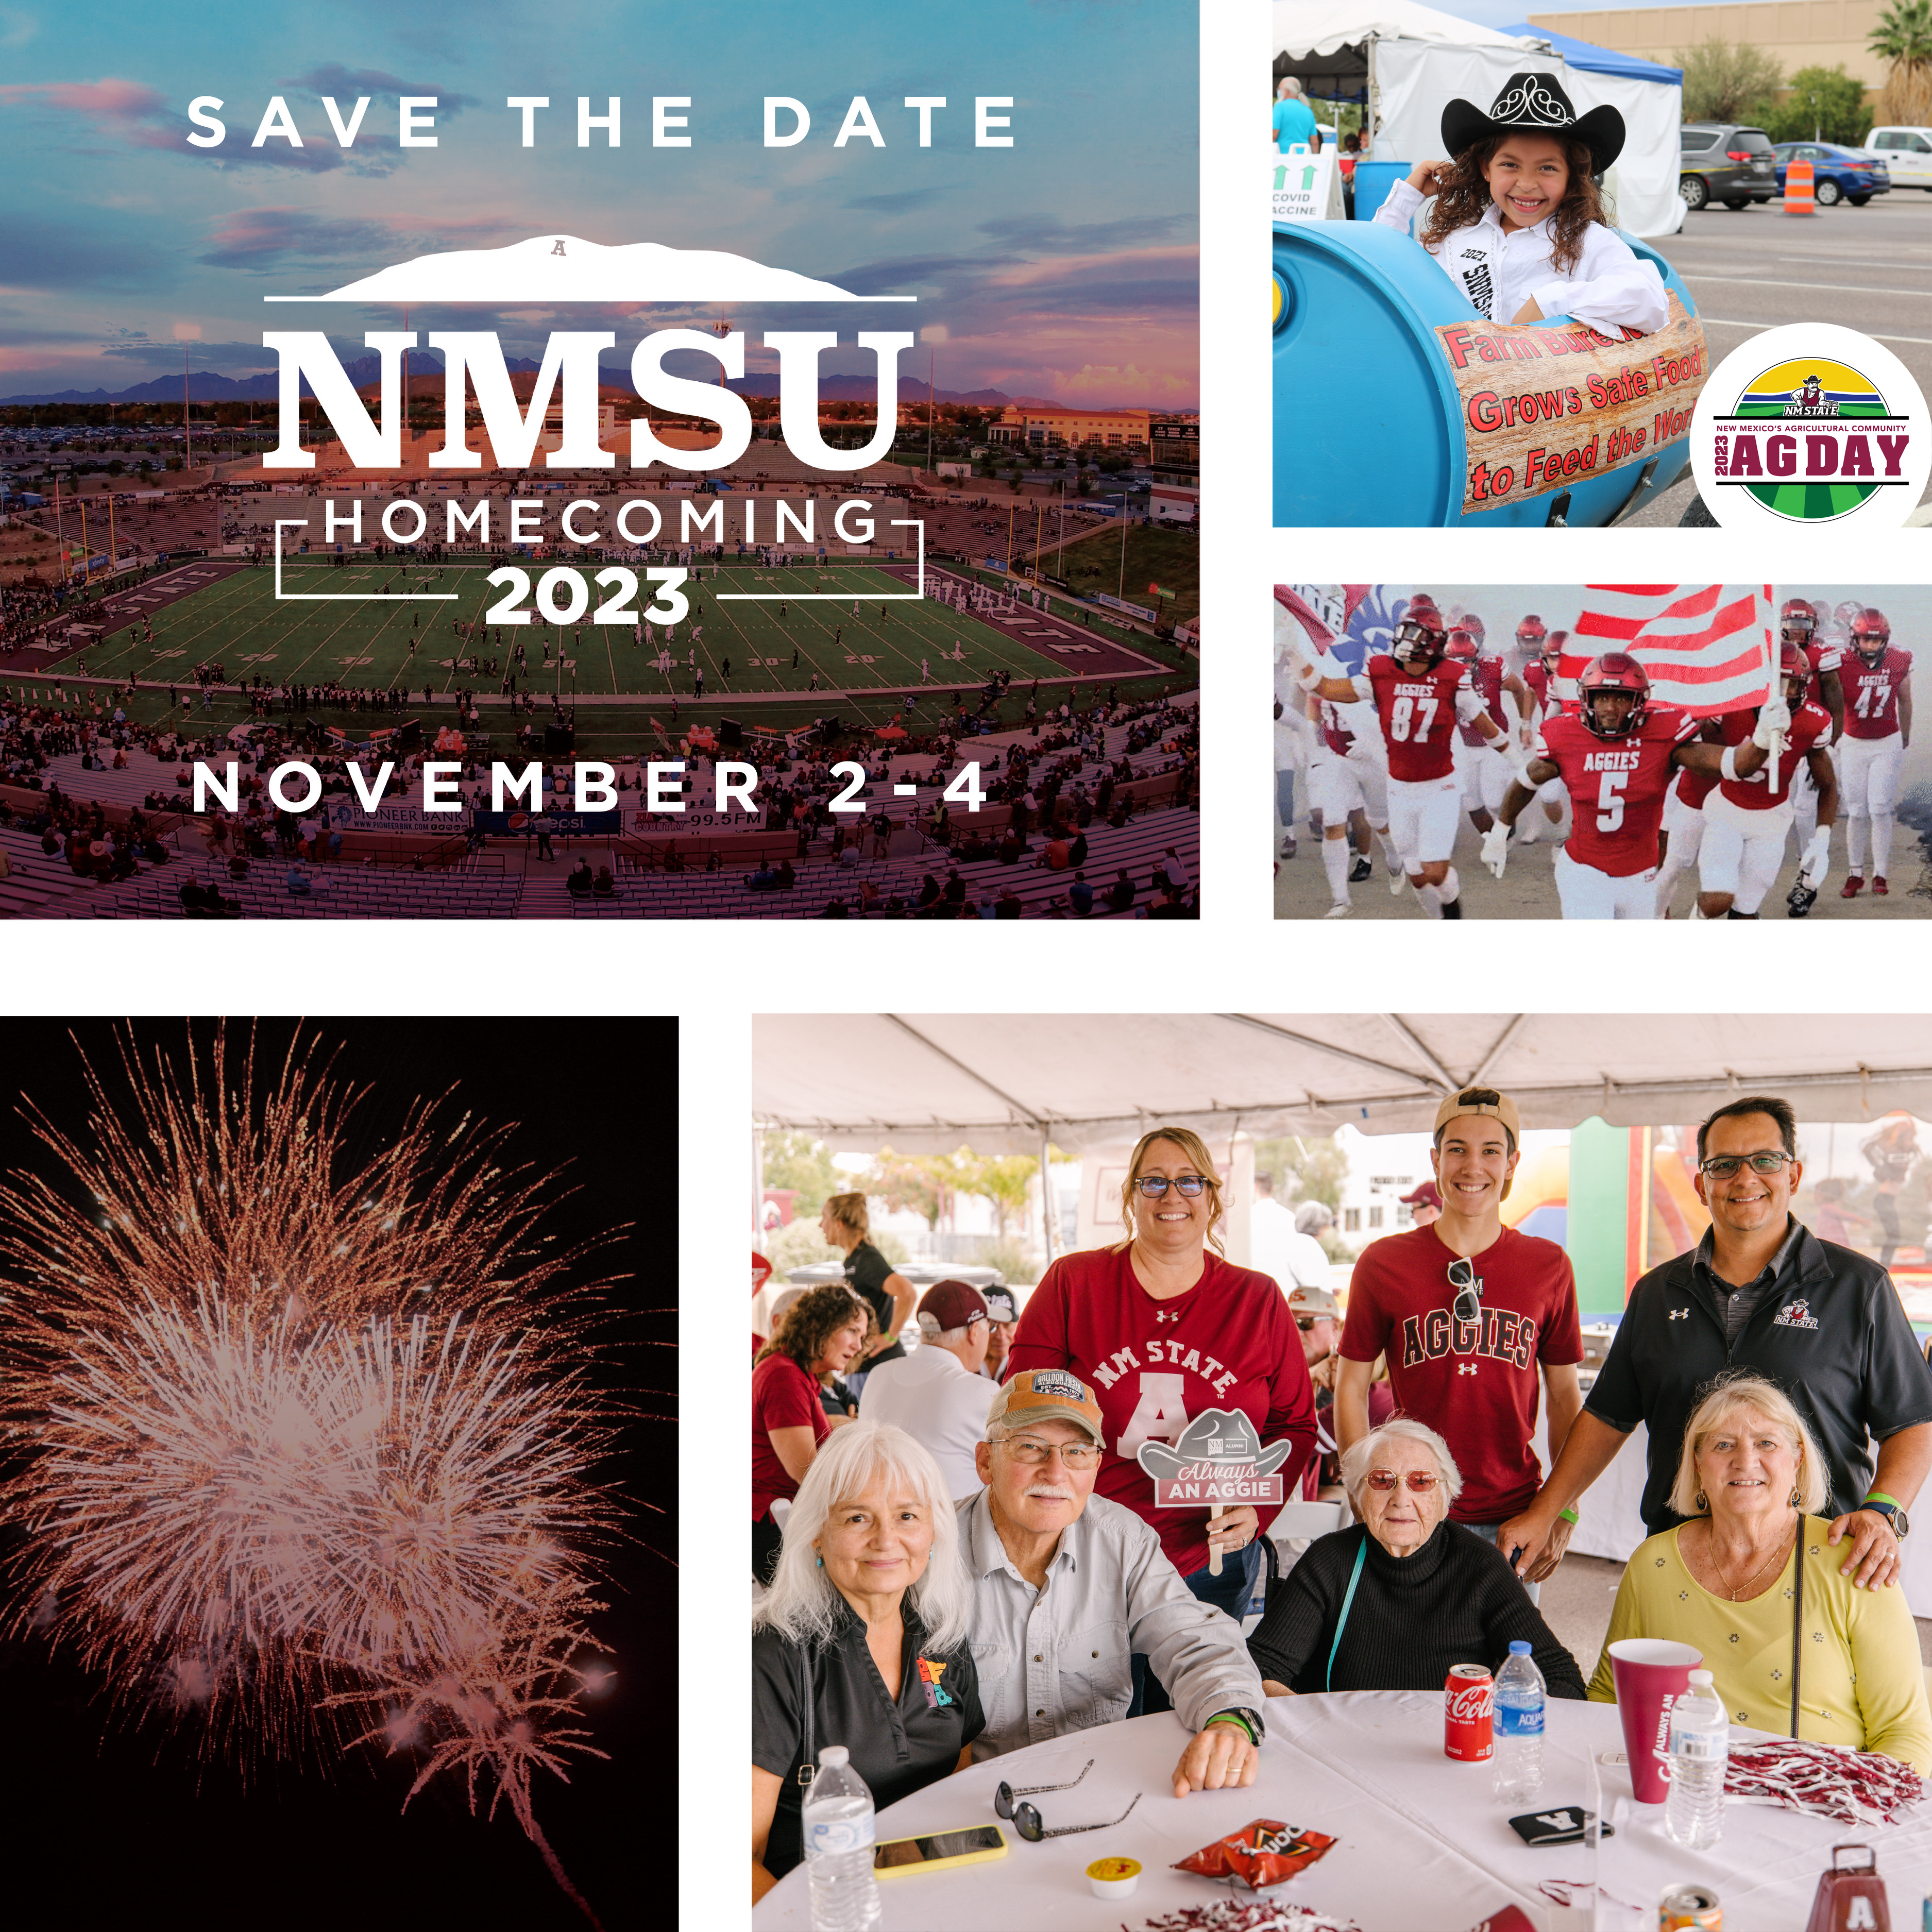 save the date for N M S U 2023 homecoming November second through fourth